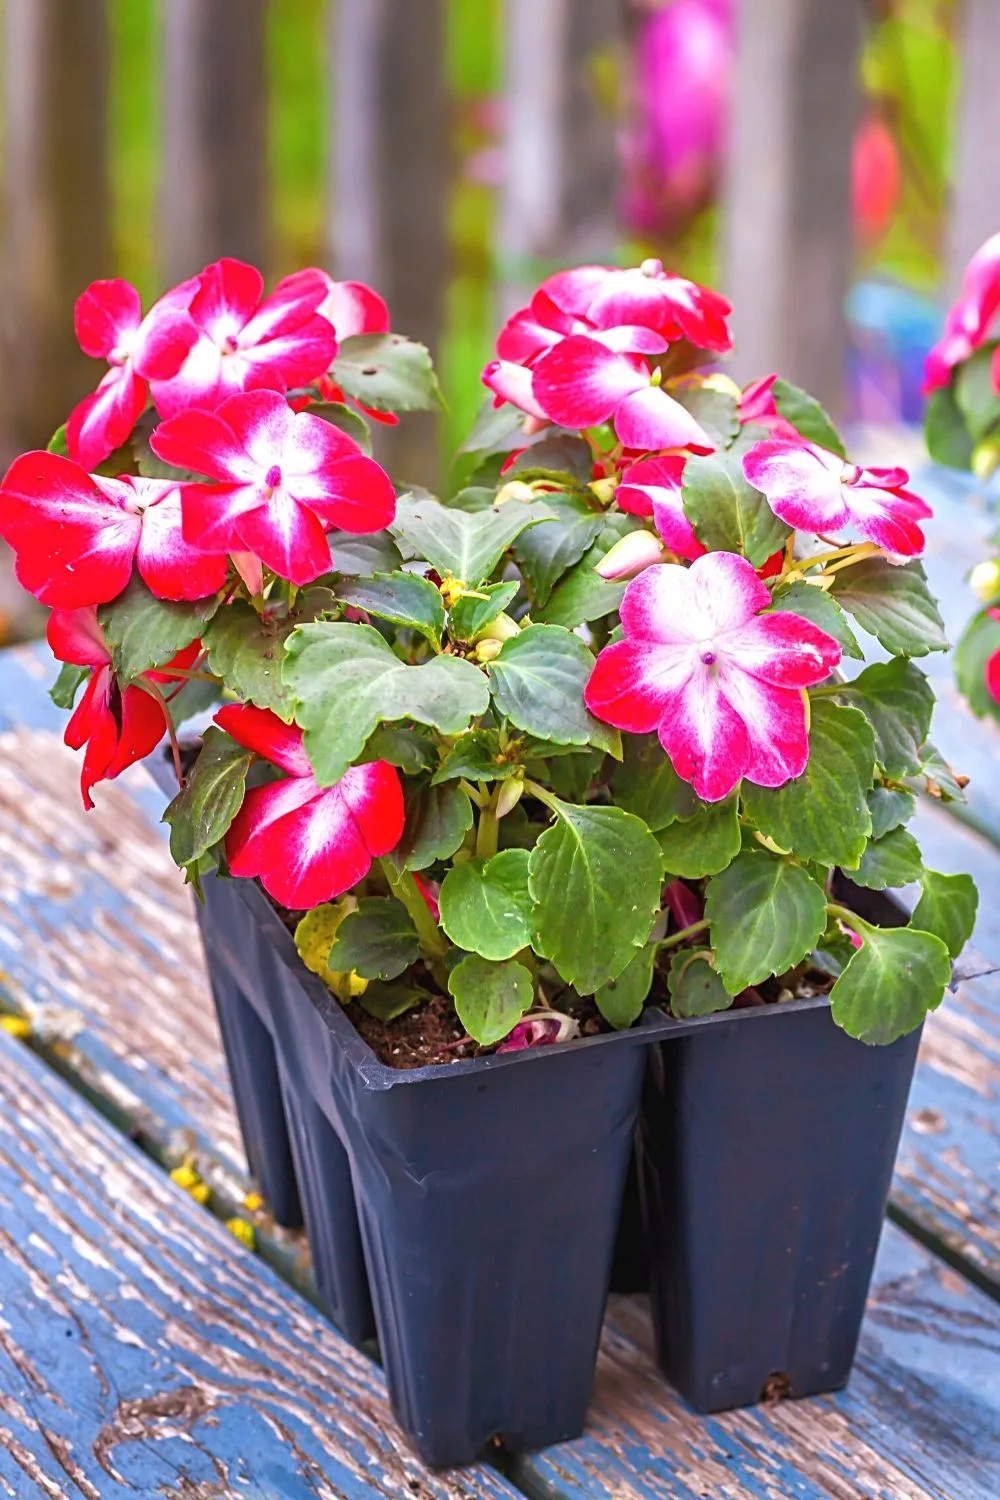 Impatiens is another beautiful plant that you can grow in the water